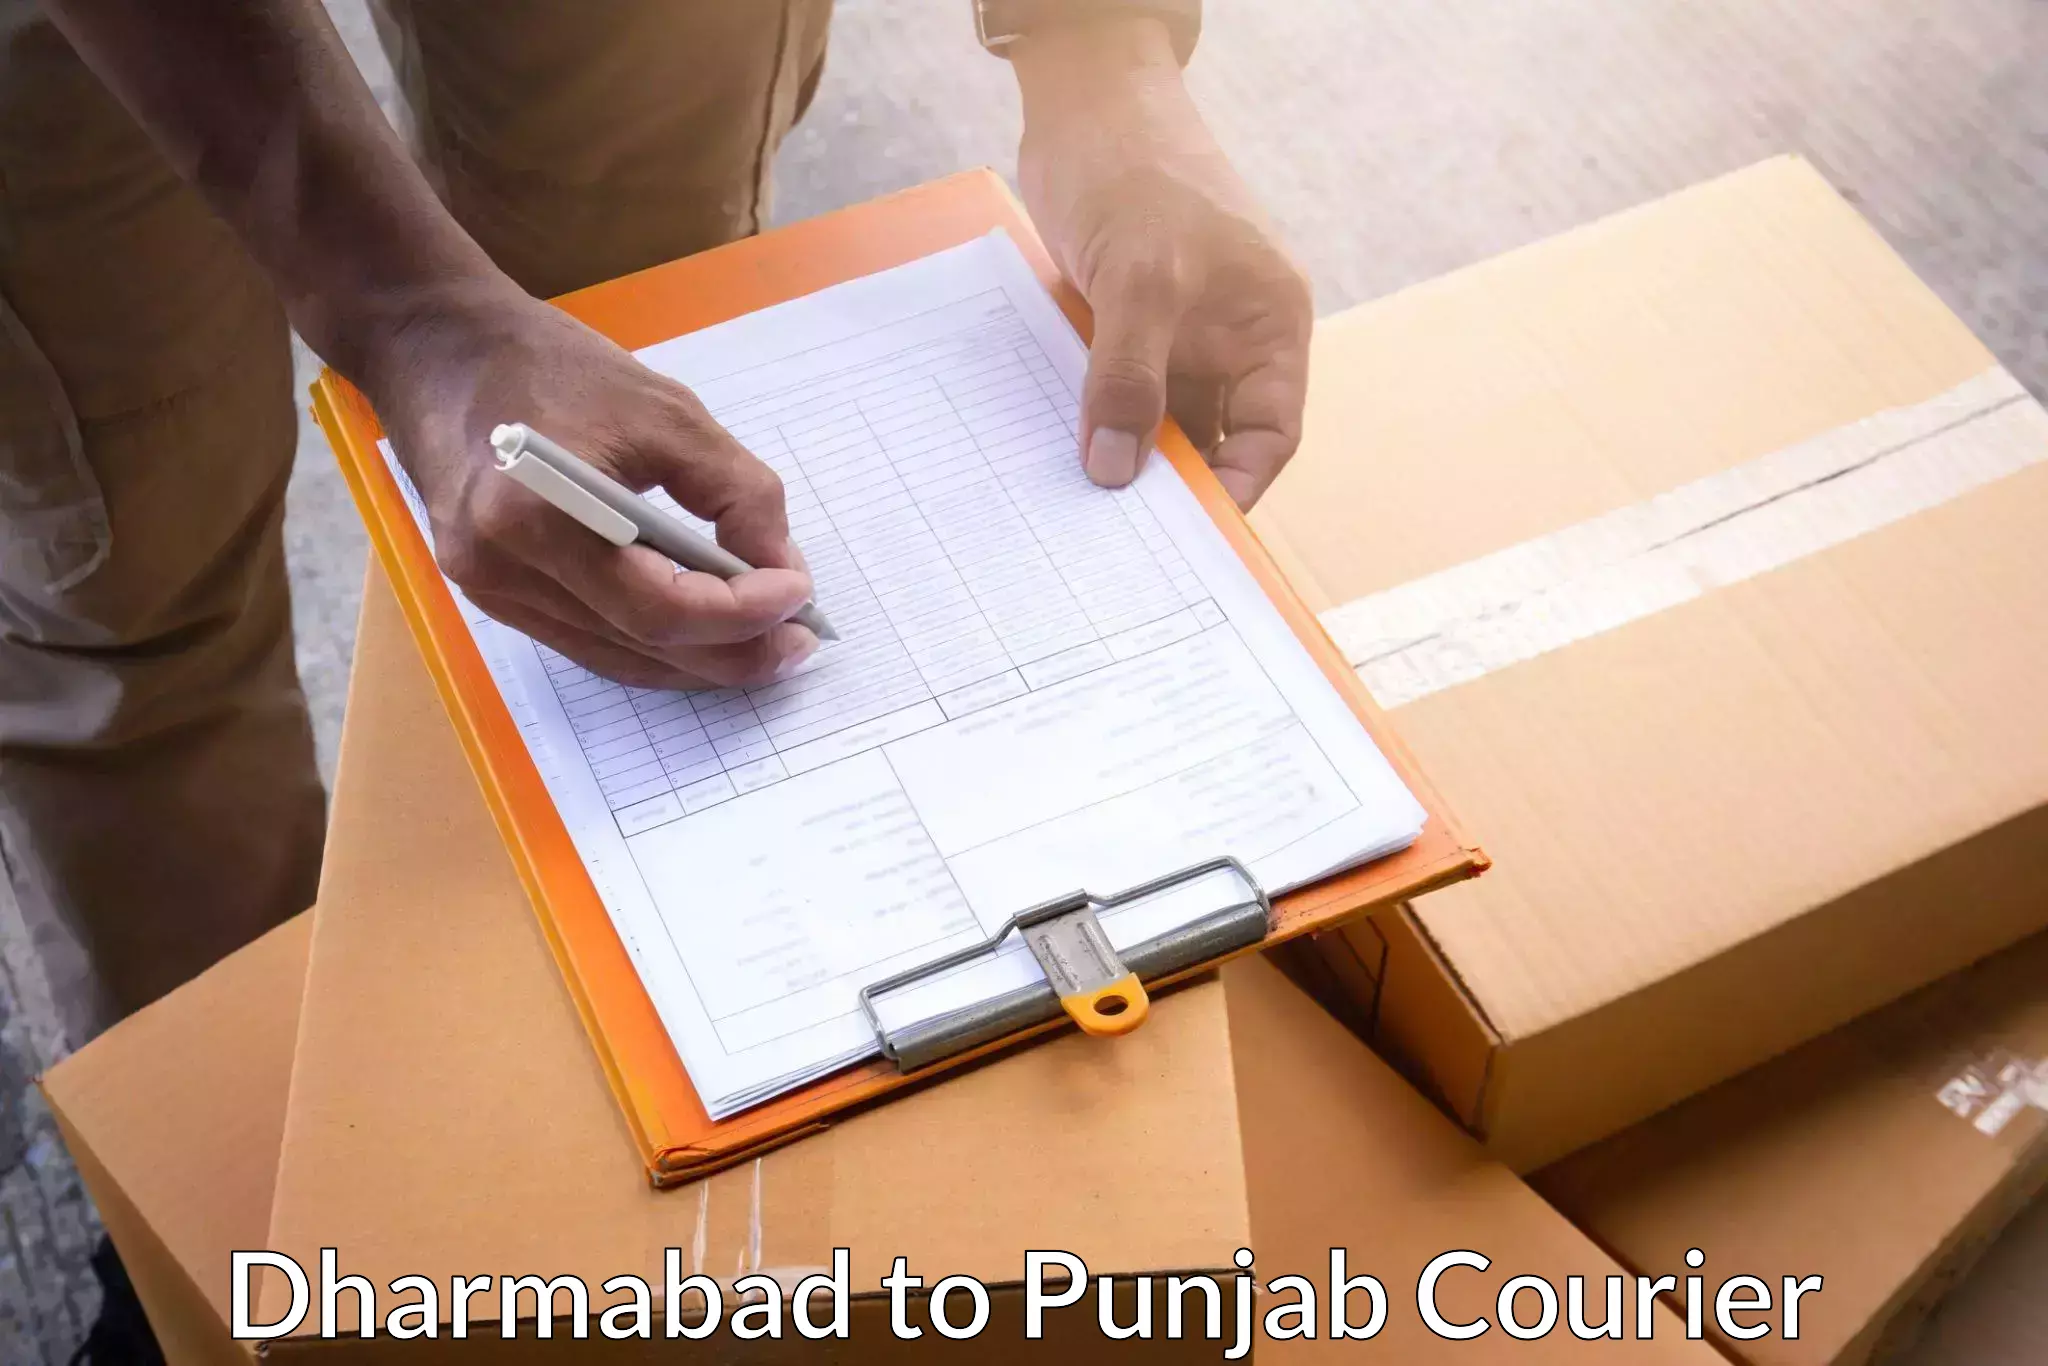 Nationwide shipping capabilities Dharmabad to Punjab